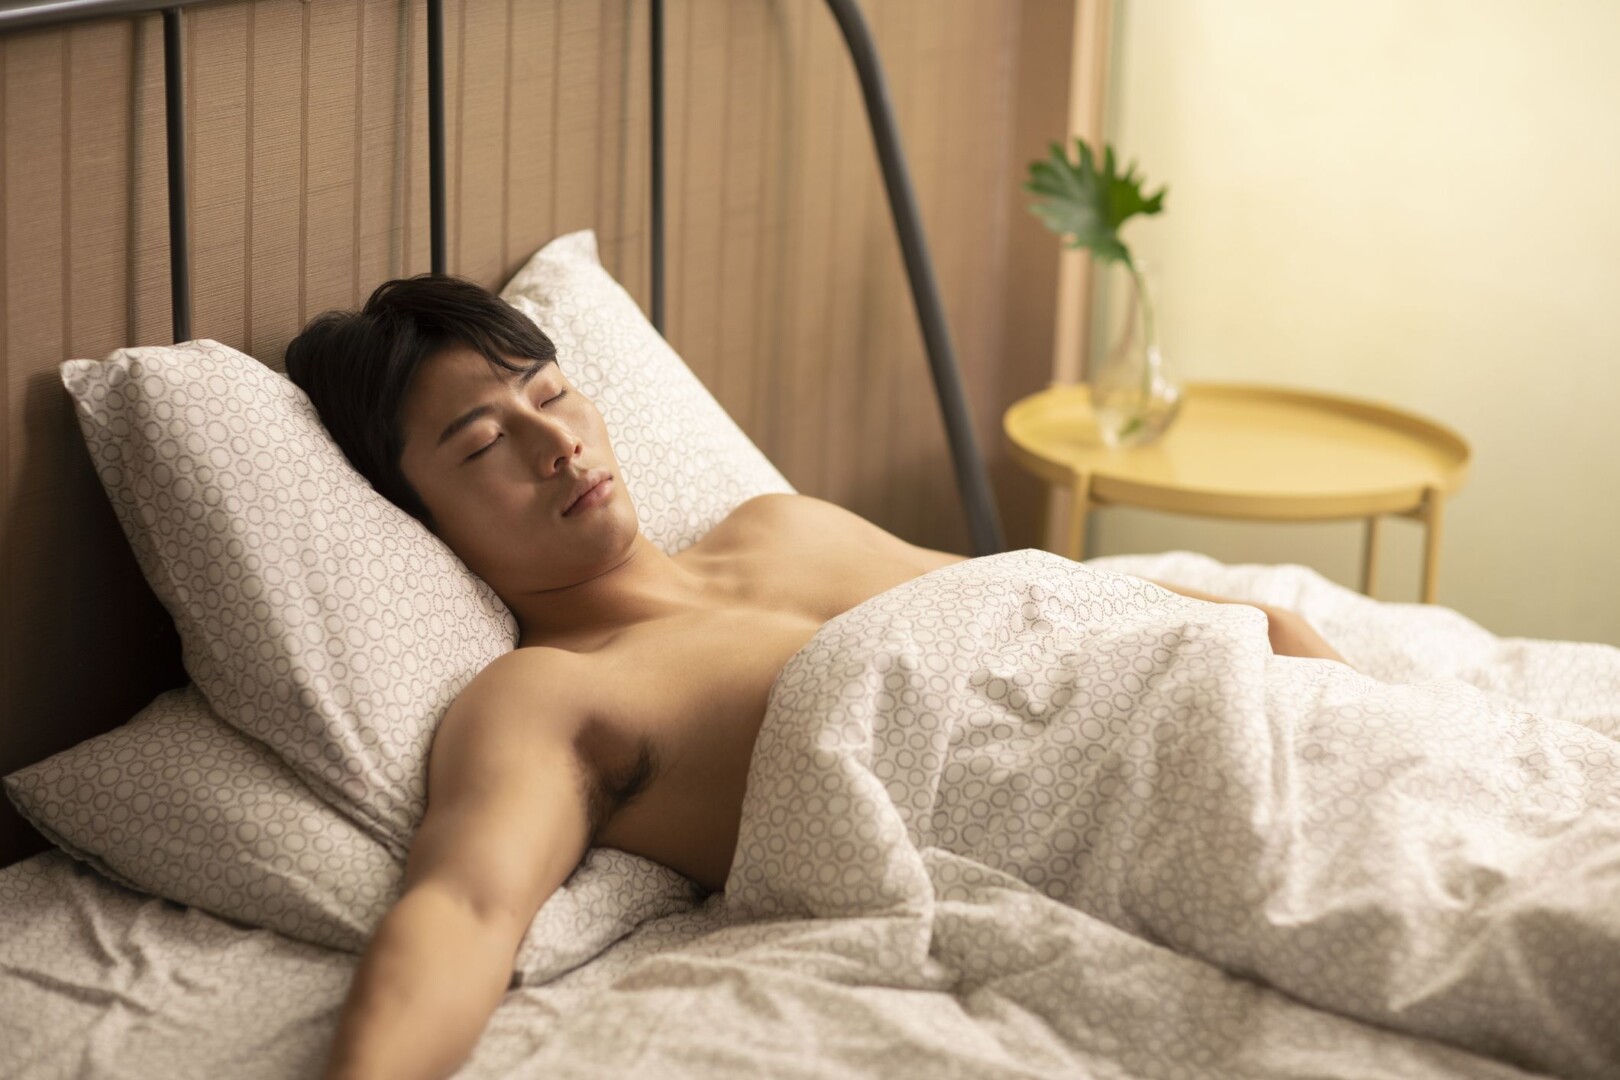 Young Man Sleeping In Bed Royalty Free Image 1630329202